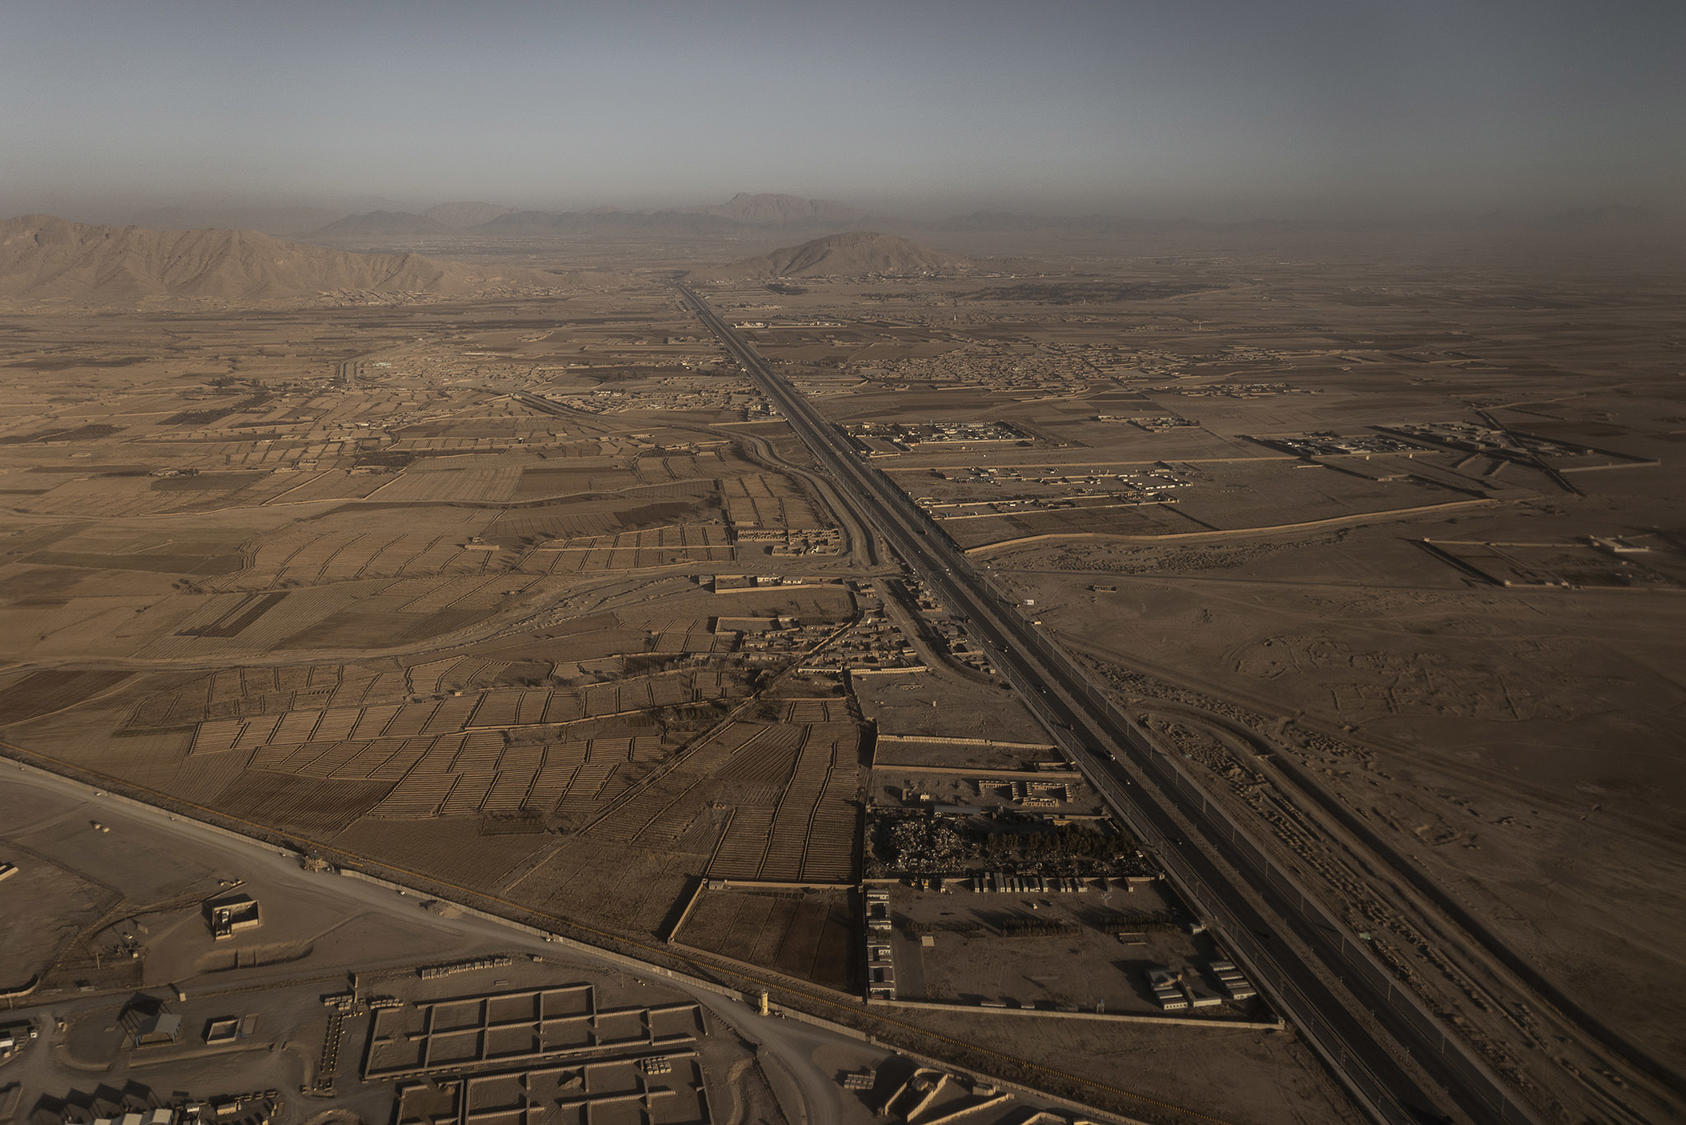 The road connecting Spin Boldak, a town and border crossing with Pakistan, to Kandahar, Afghanistan. February 1, 2021. (Jim Huylebroek/The New York Times)